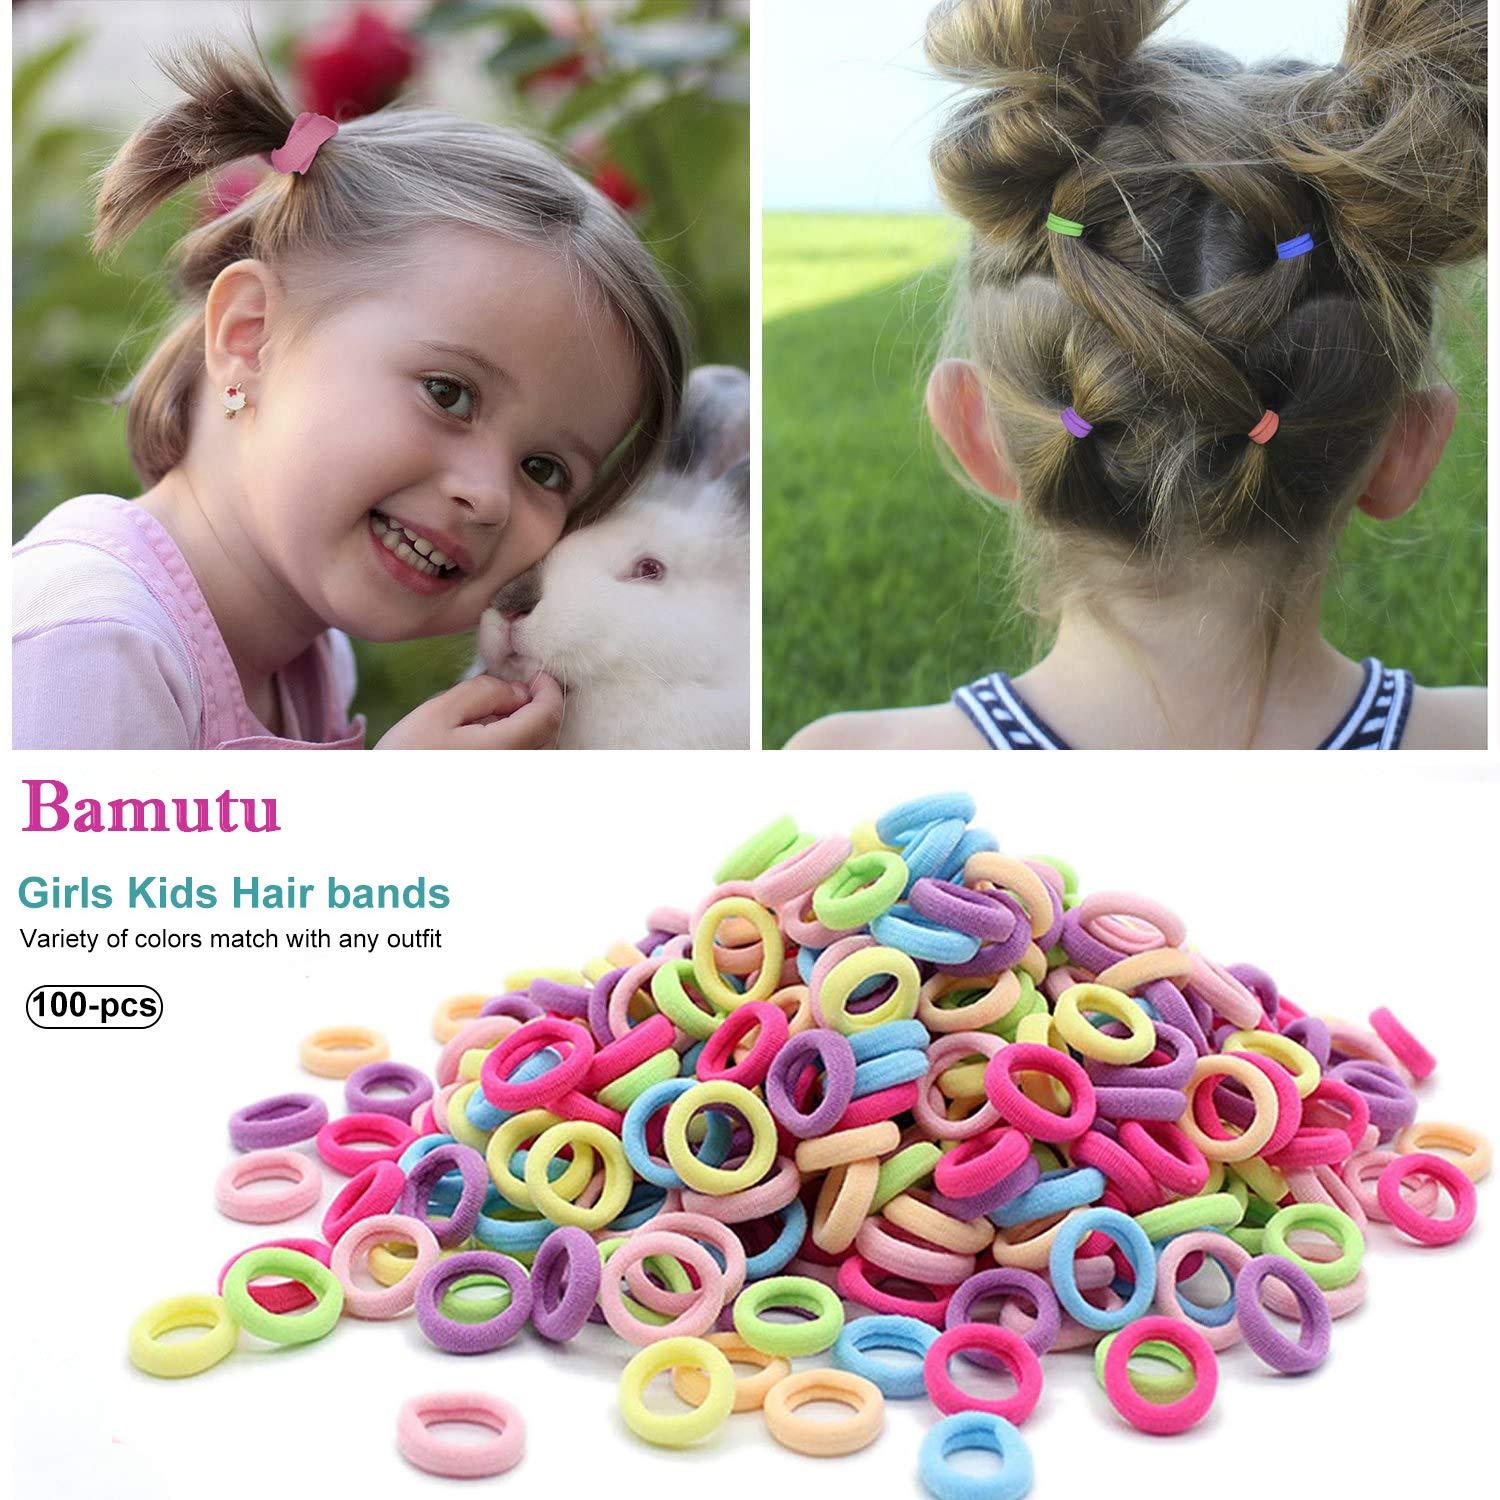 Buy Hair Bands for Girls  Baby girl hair accessories, Hair band